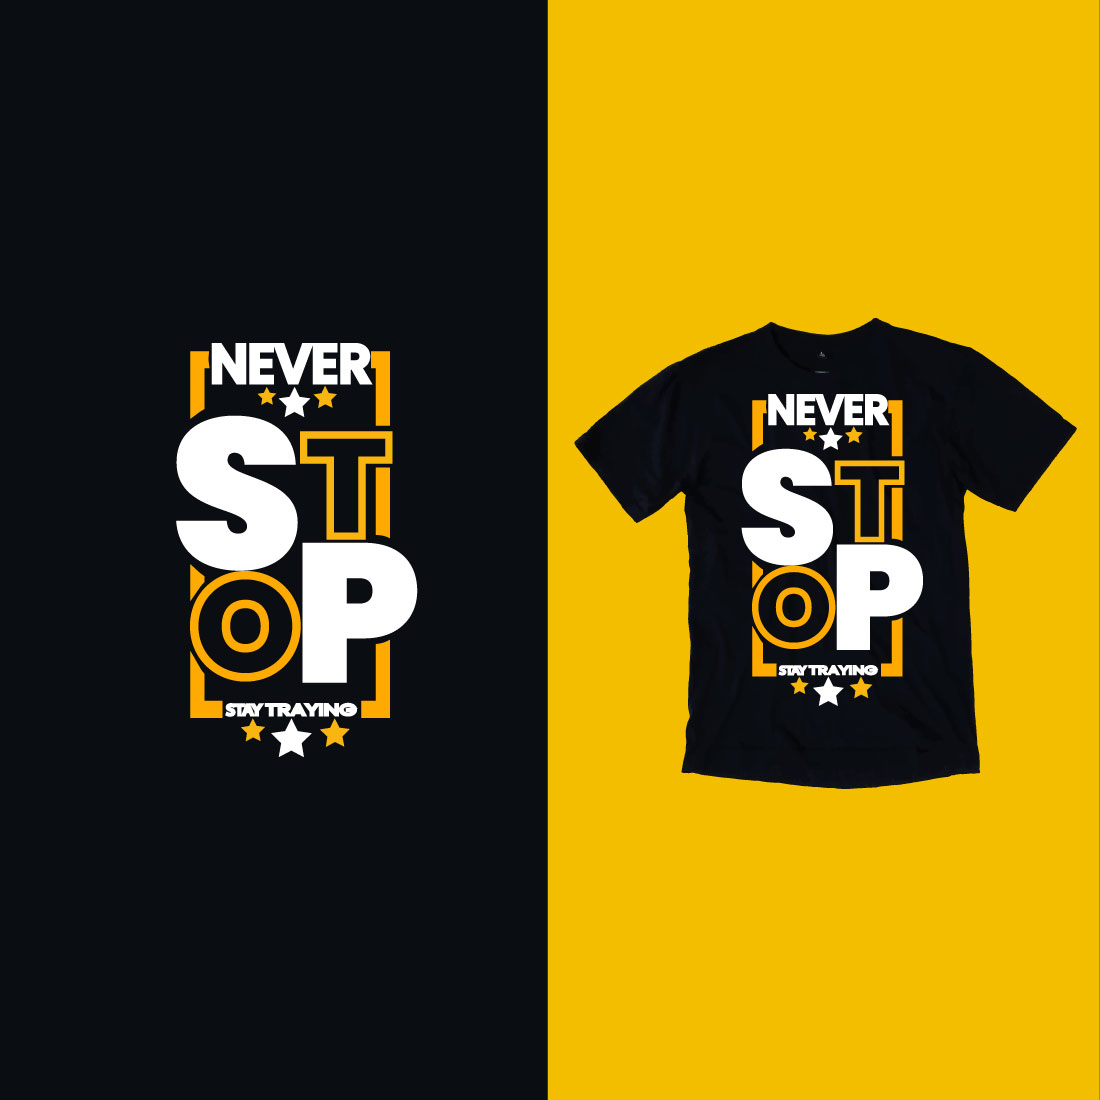 T - shirt that says never stop and a t - shirt that says stop.